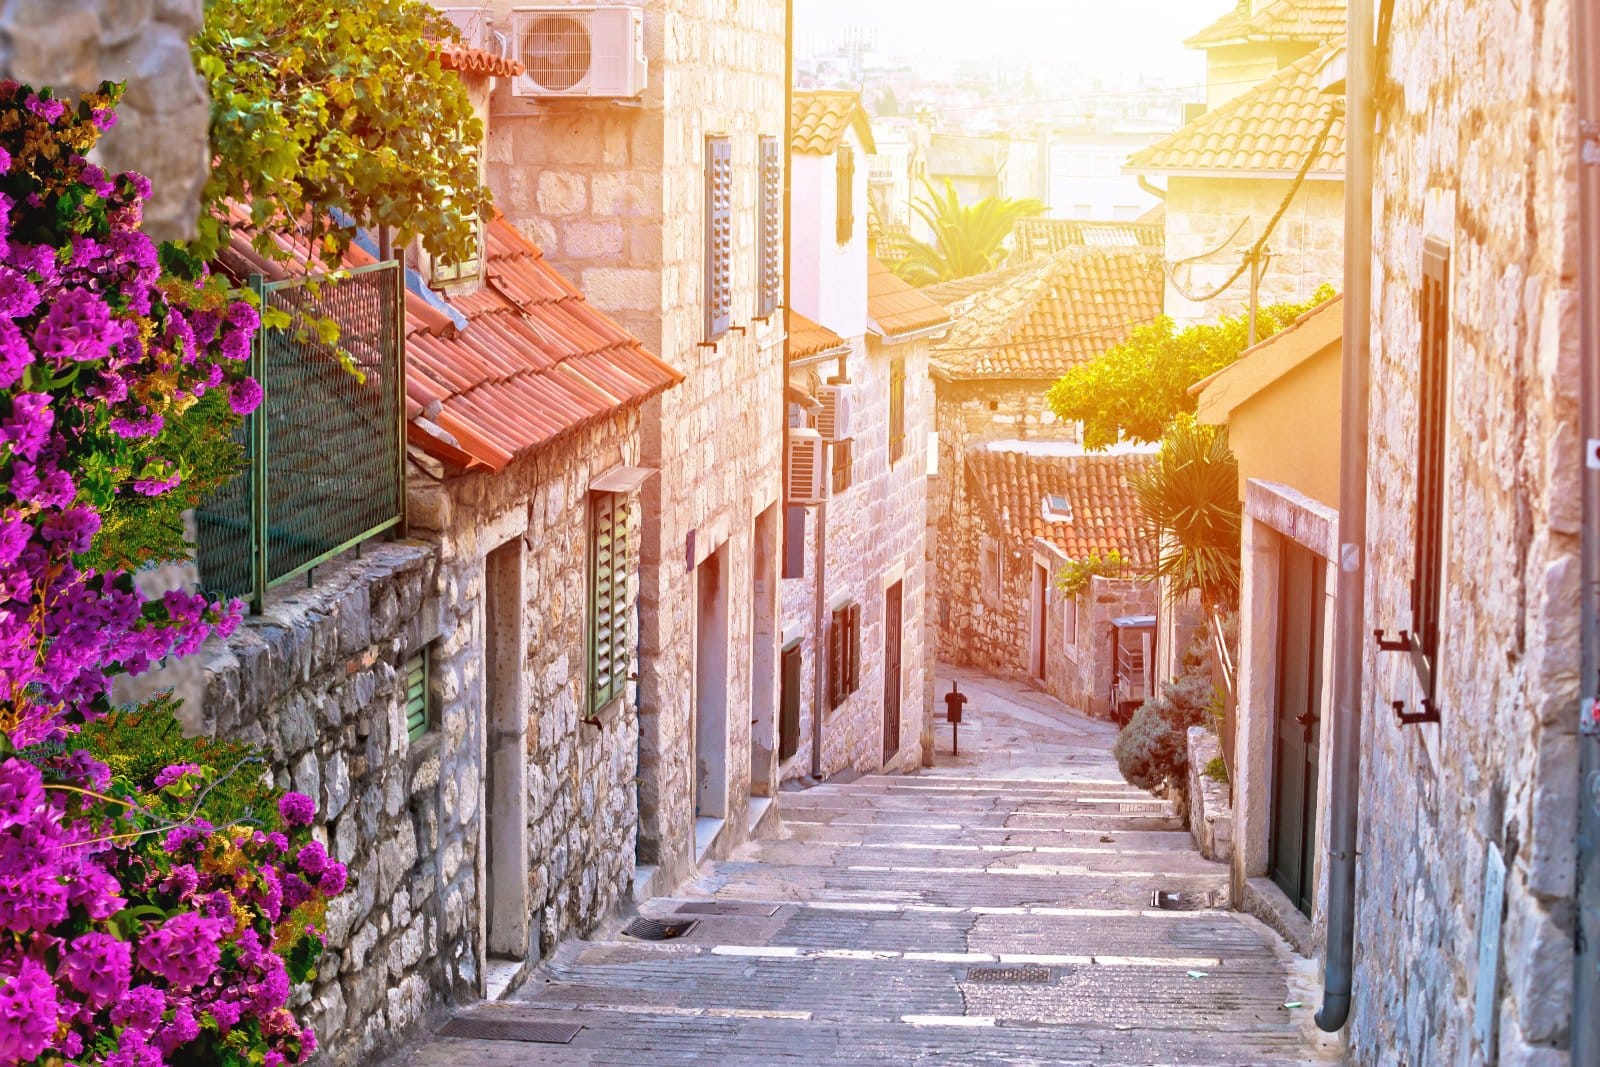 Image Credit: Shutterstock / xbrchx <p>The rise in tourism in cities like Dubrovnik has seen locals become increasingly frustrated with the behaviour of some British visitors. Issues include overcrowding and damage to UNESCO sites.</p>